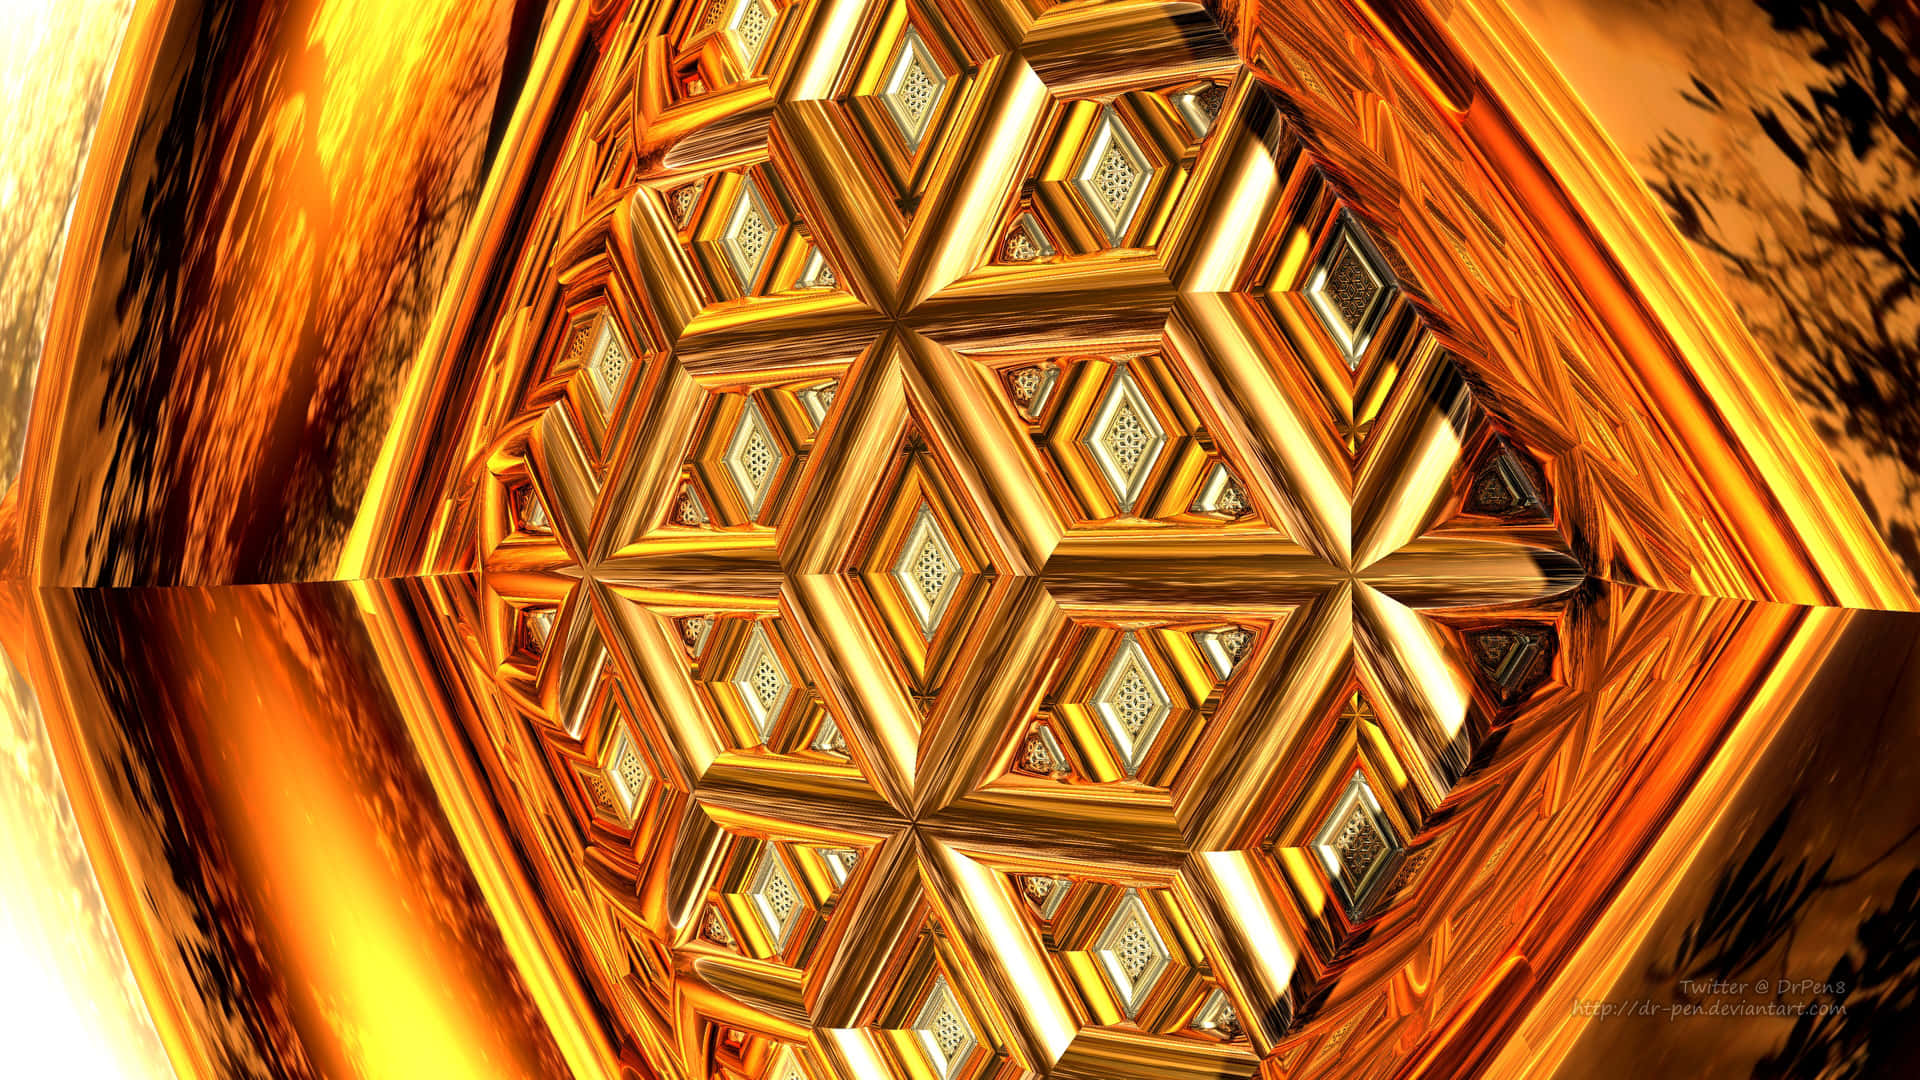 A Golden Abstract Image With A Golden Background